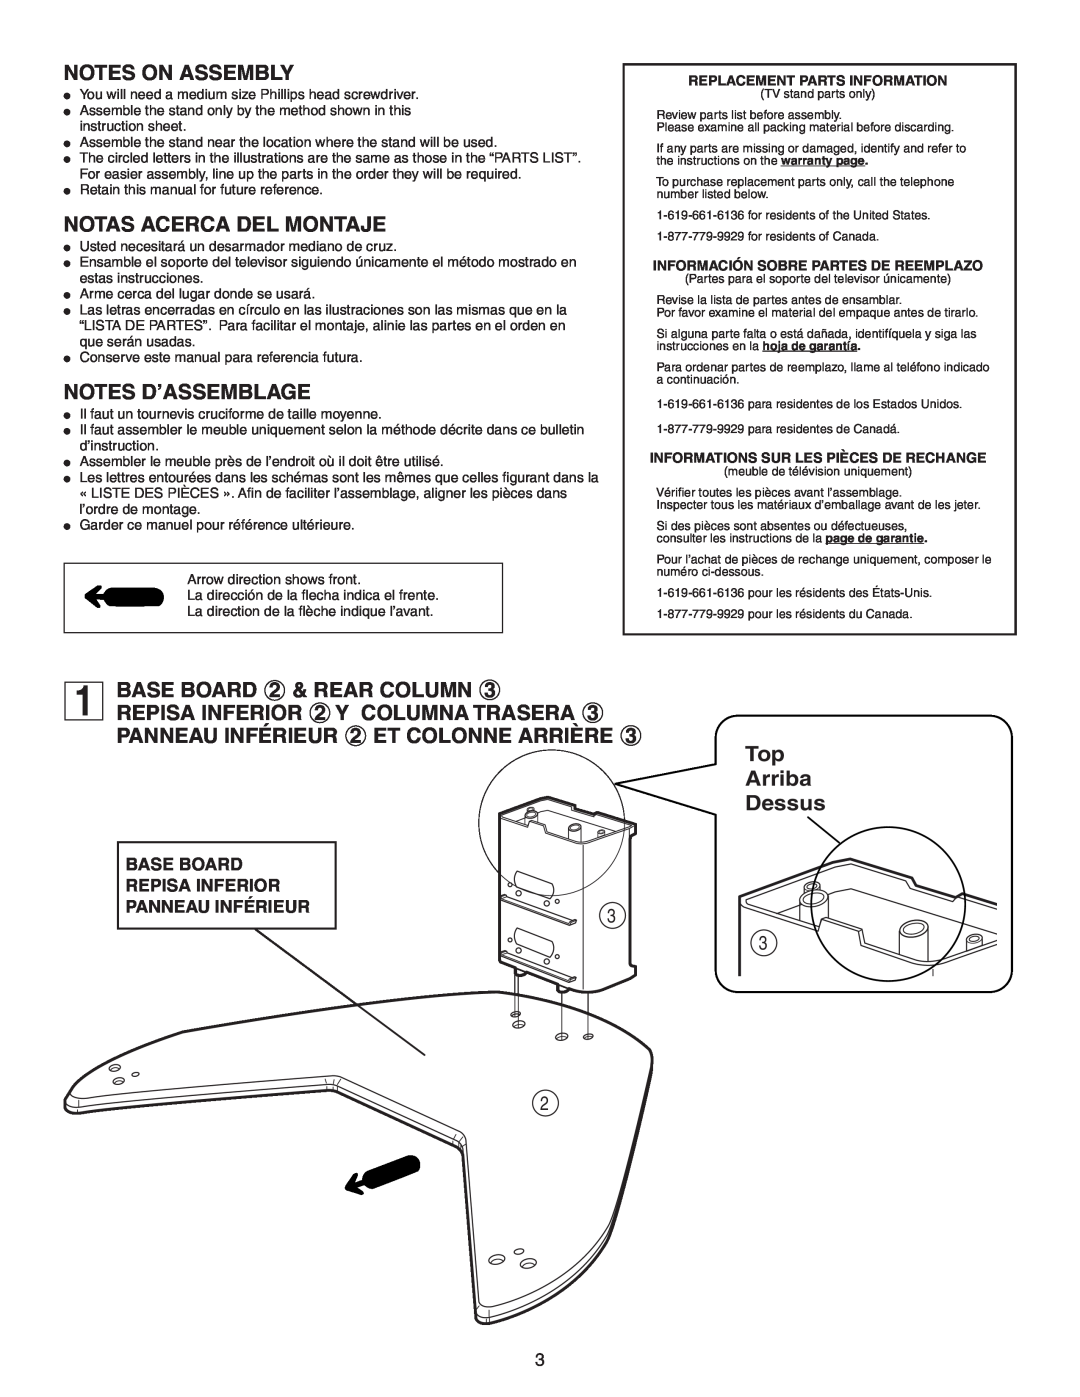 Sony SU-36HX1 Notes On Assembly, Notas Acerca Del Montaje, Notes D’Assemblage, BASE BOARD 2 & REAR COLUMN, Arriba, Dessus 